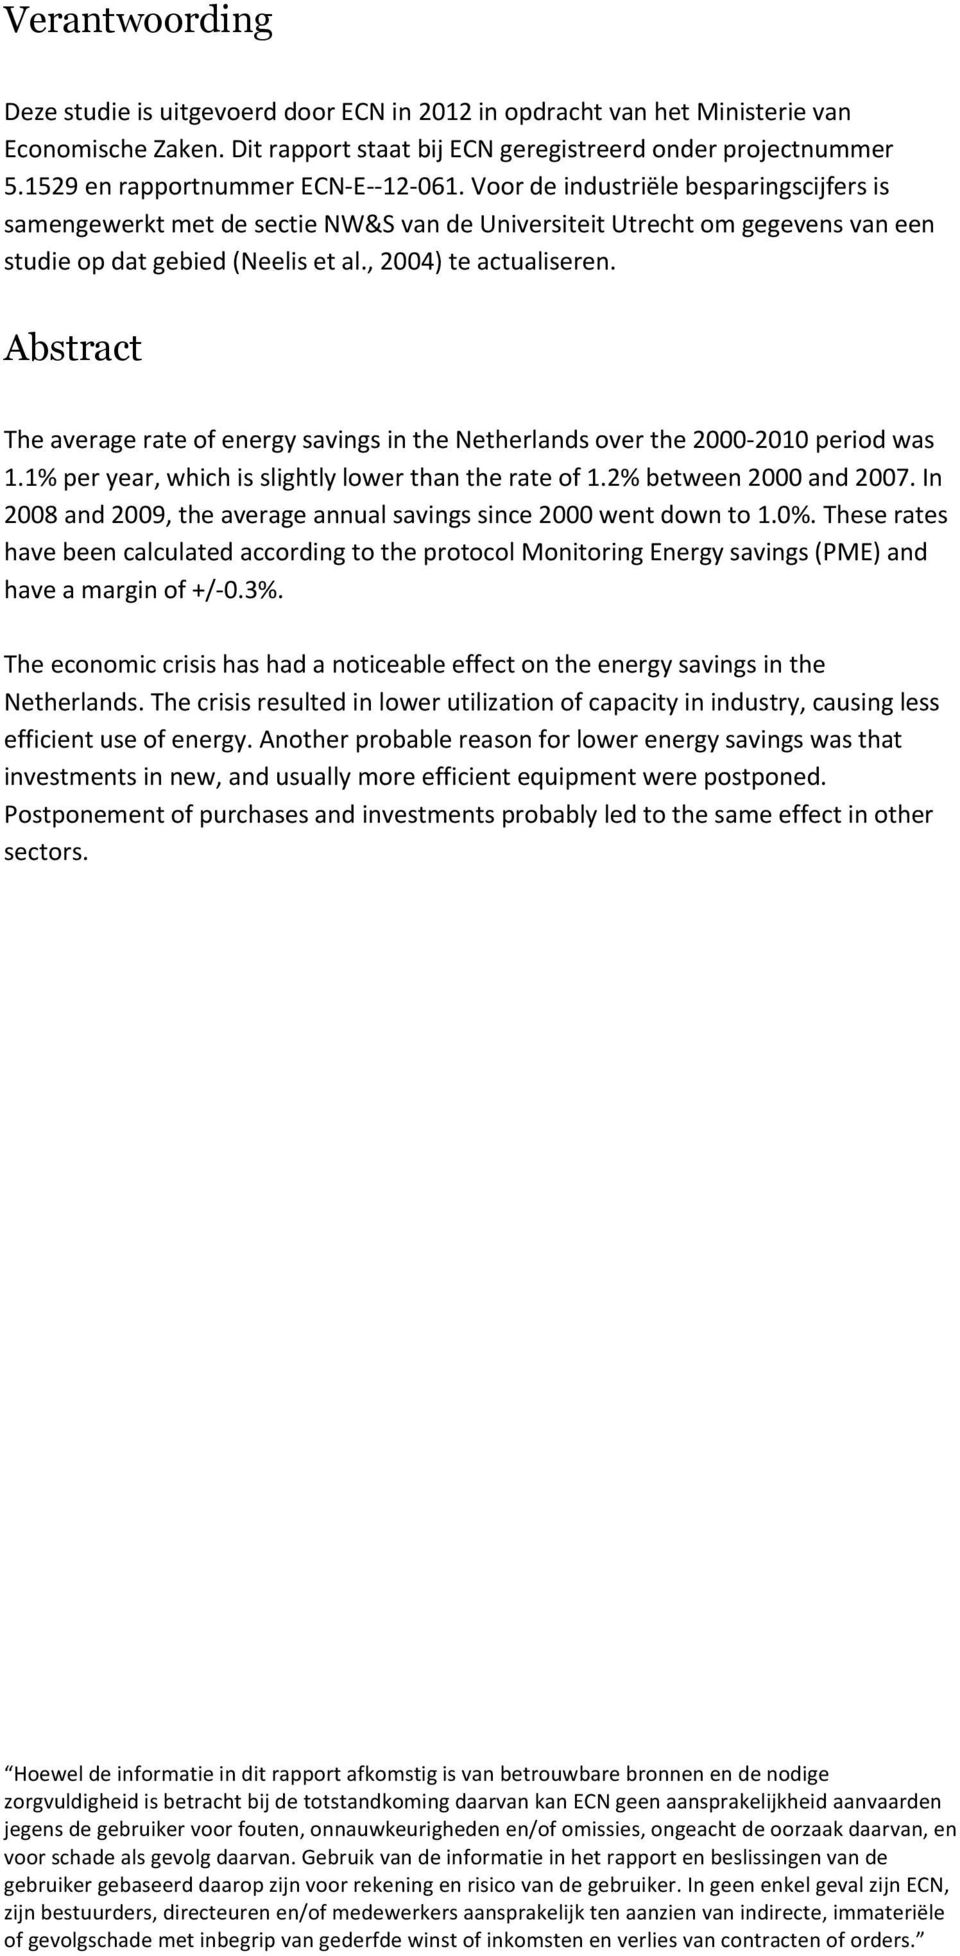 , 2004) te actualiseren. Abstract The average rate of energy savings in the Netherlands over the 2000-2010 period was 1.1% per year, which is slightly lower than the rate of 1.